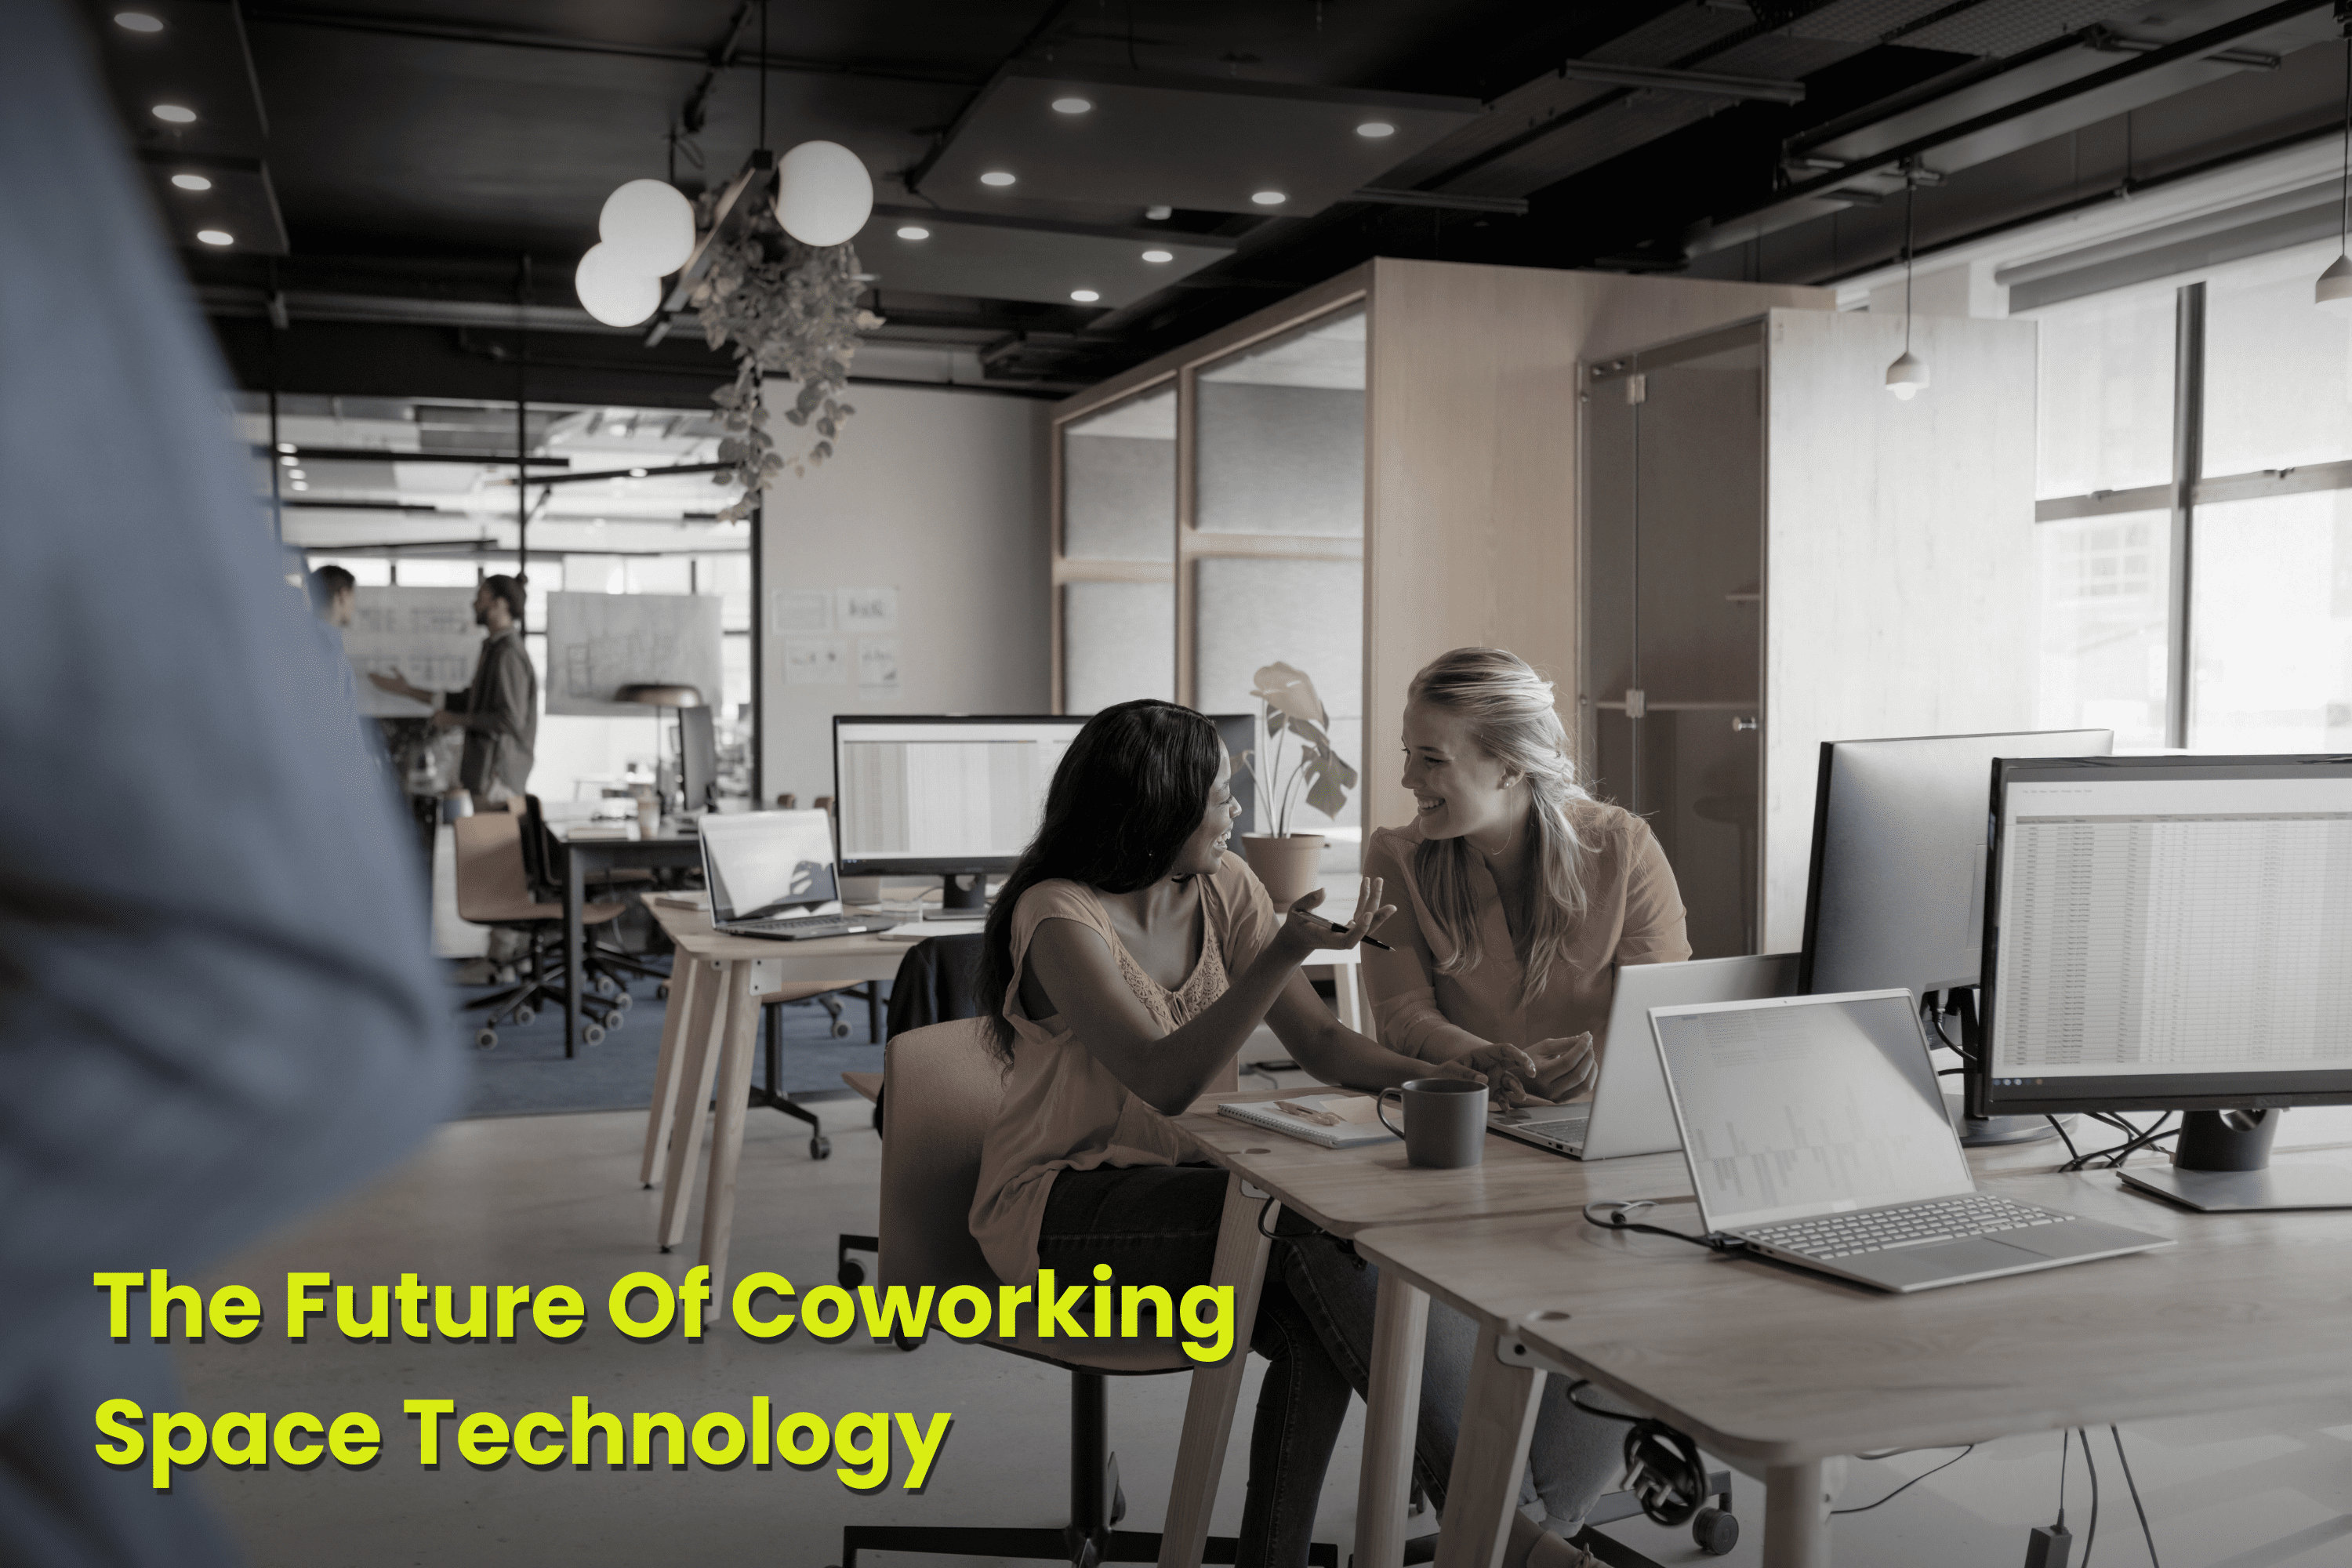 Colleagues collaborating in a coworking space